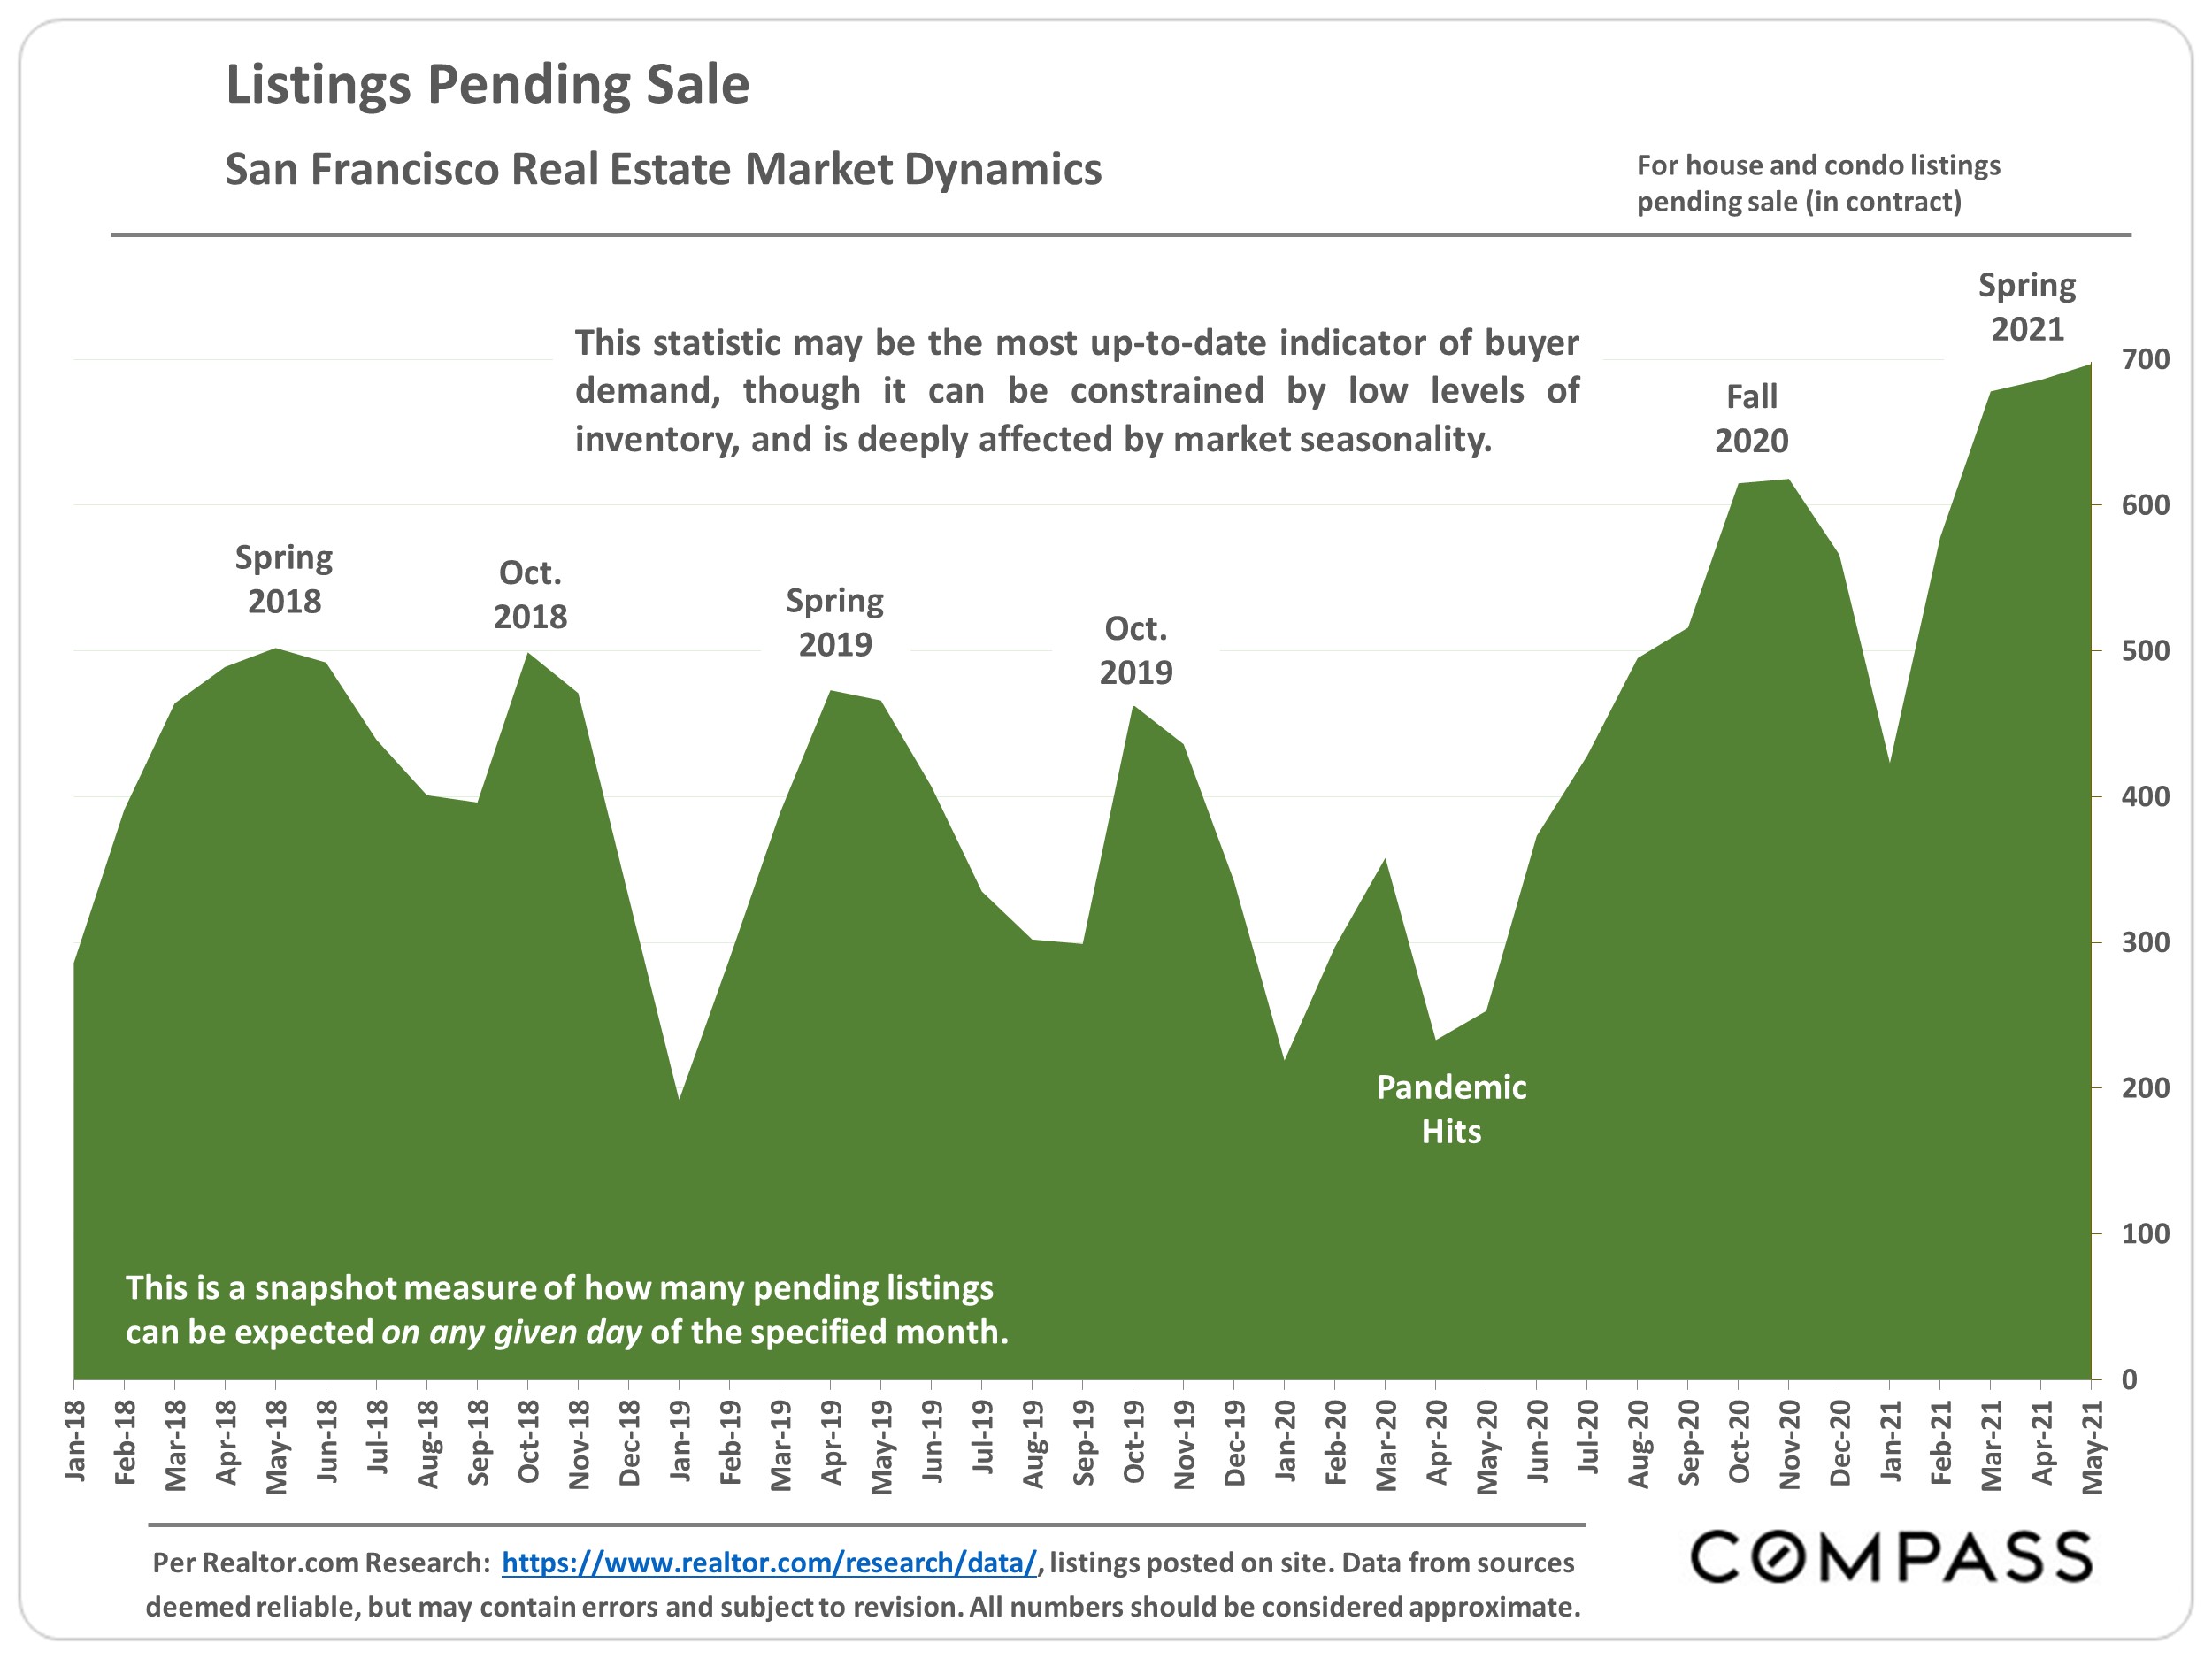 Chart showing theListings Pending Sale, San Francisco Real Estate Market Dynamics for house and condo listings pending sale (in contract)